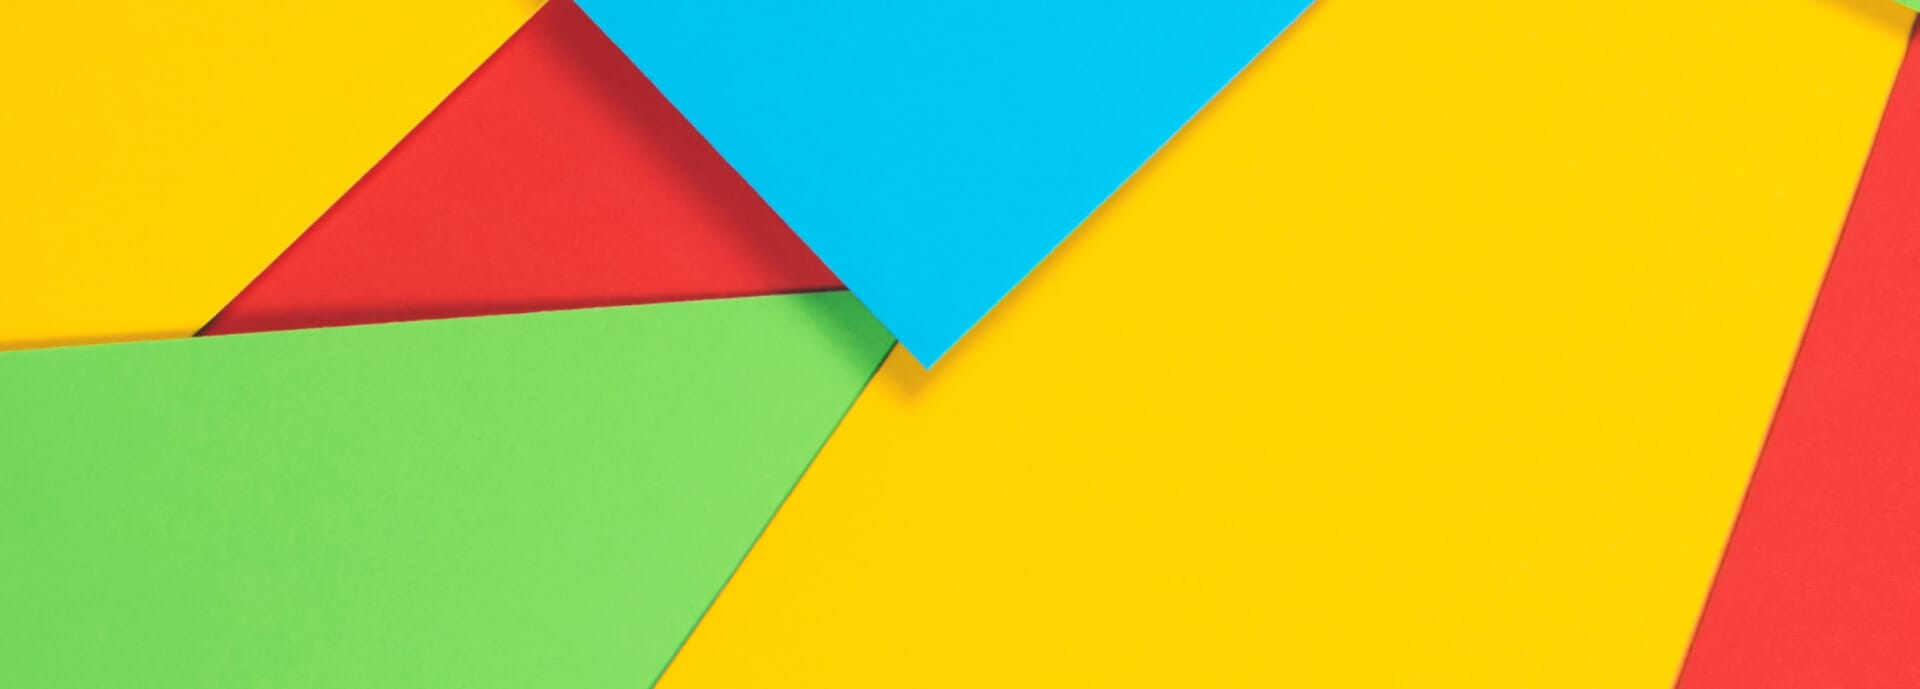 Colorful background made of red, blue, green and yellow paper cards | Google Logo evolution